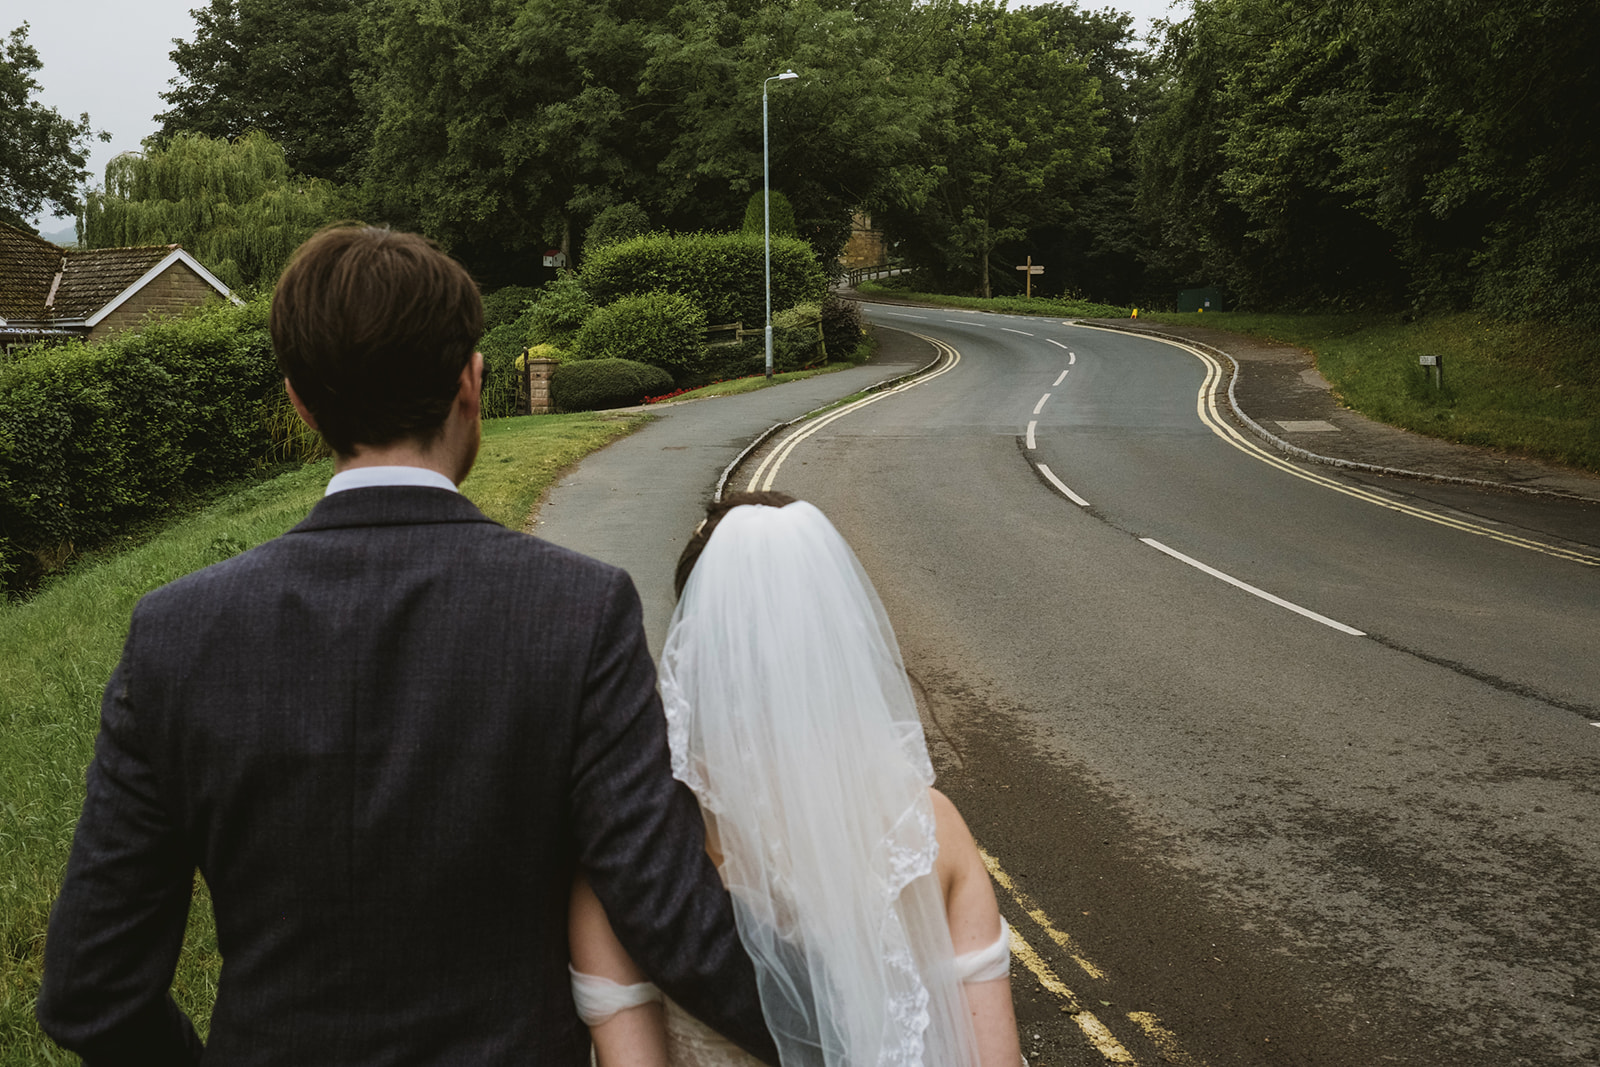 Natalie and Luke's happy and authentic Yorkshire wedding with York Place Studios who are London wedding photographers